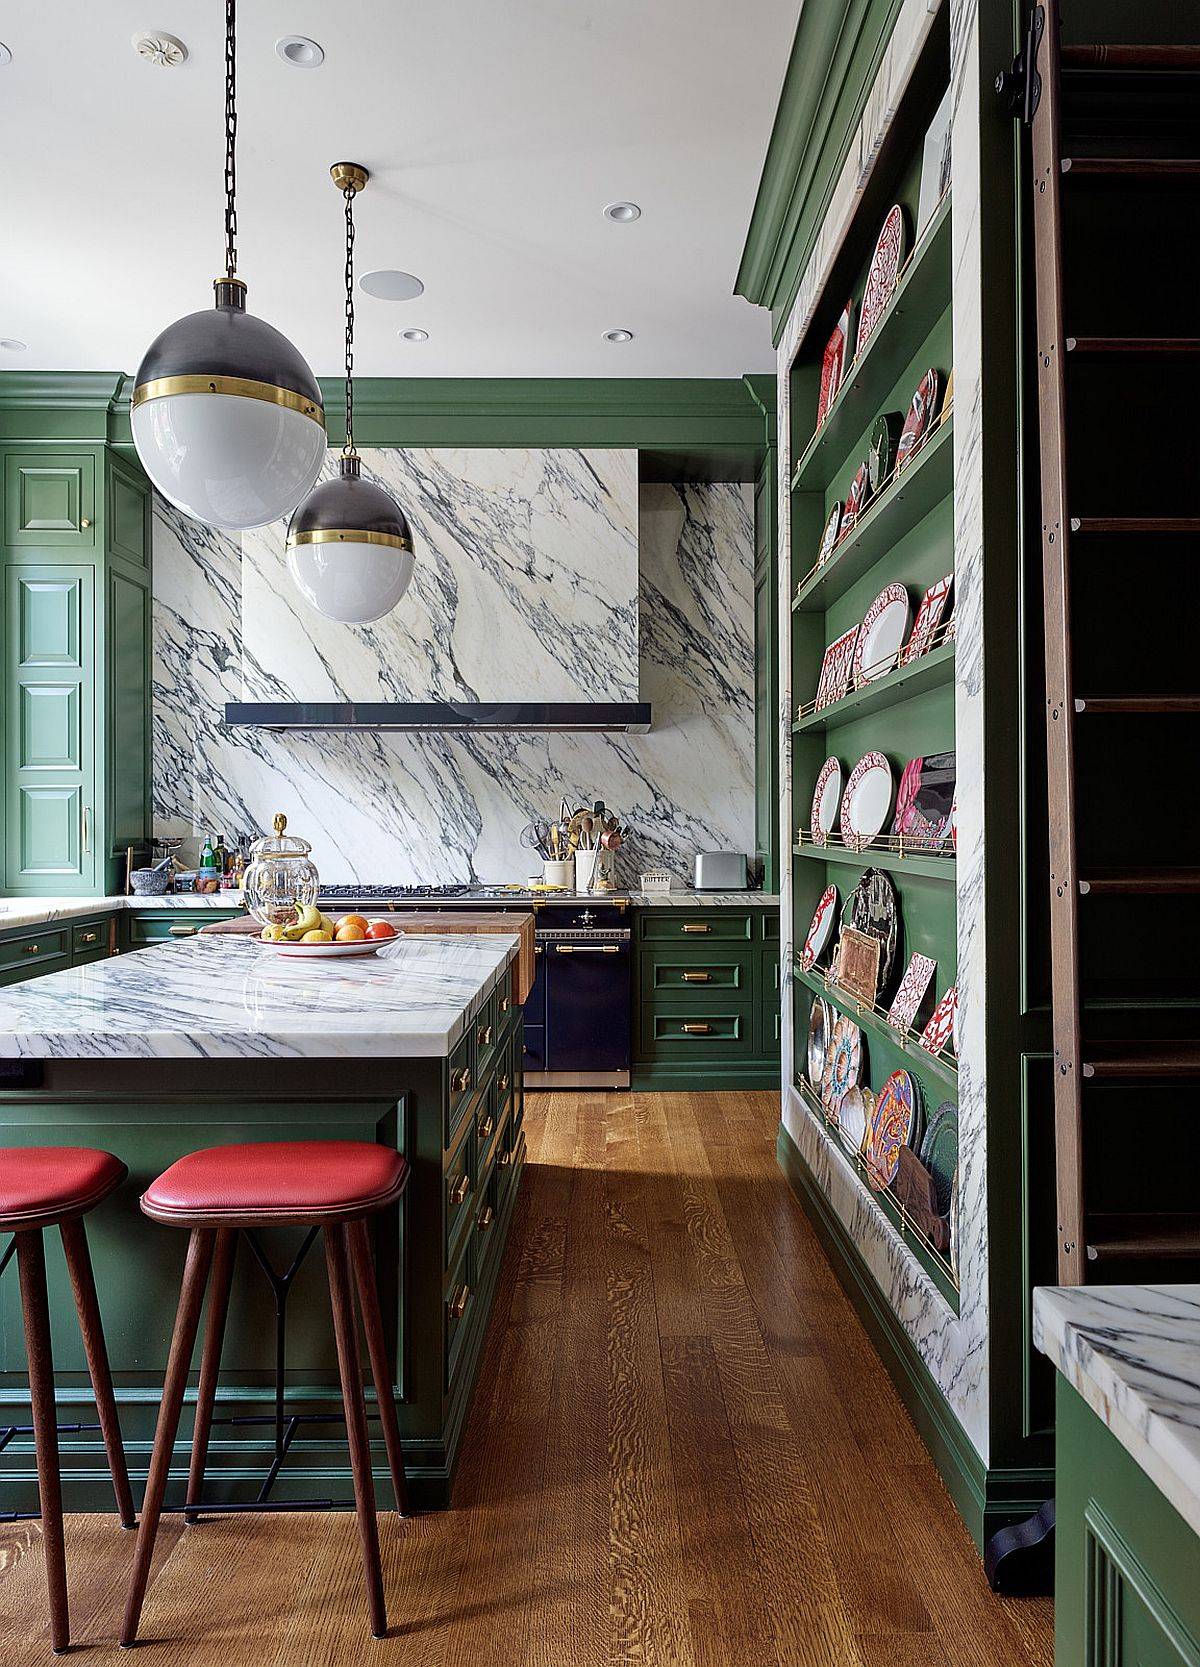 Stunningly-beautiful-marble-stone-slab-backsplash-also-covers-the-hood-in-this-kitchen-with-green-cabinets-53871